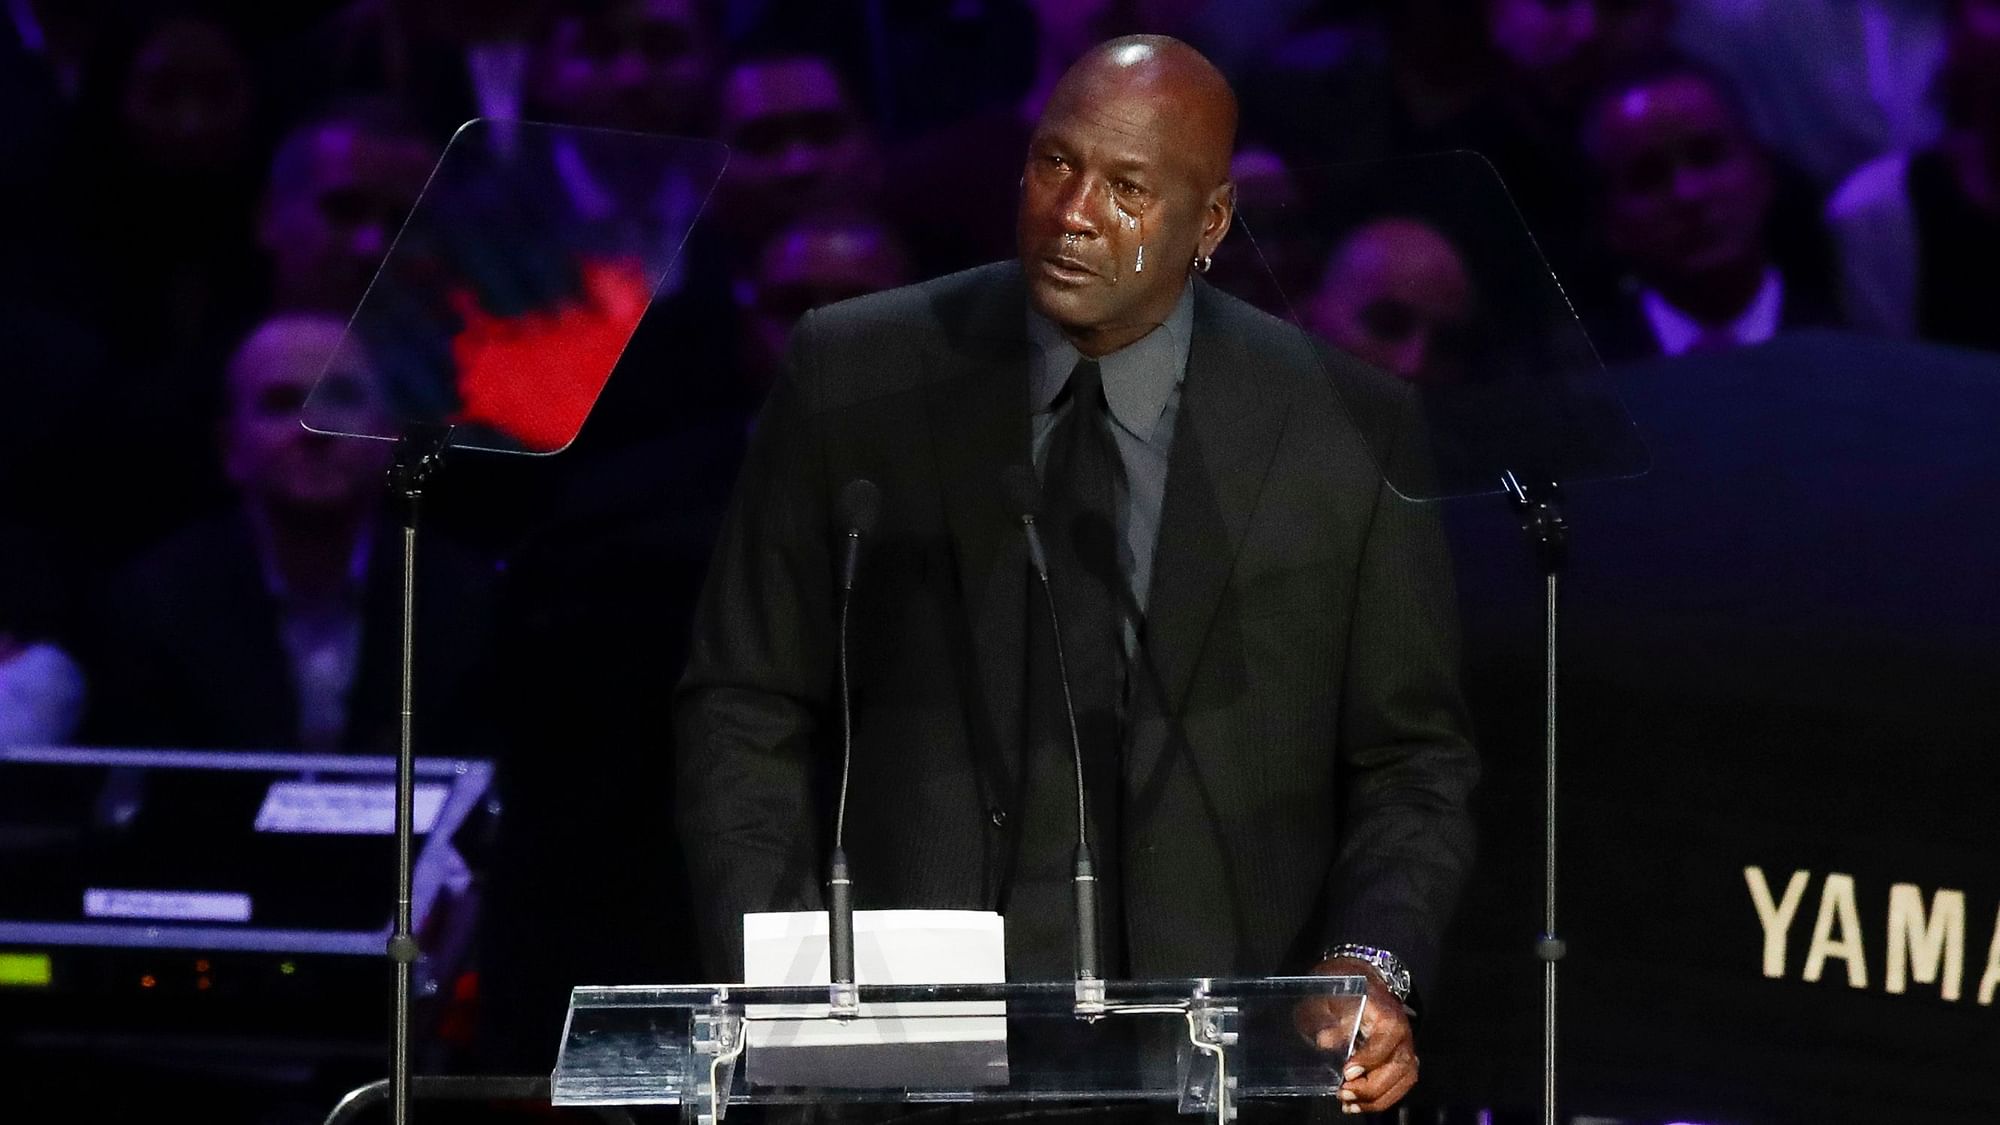 Michael Jordan broke into tears several times during a moving speech about his largely unpublicised friendship with Kobe Bryant.